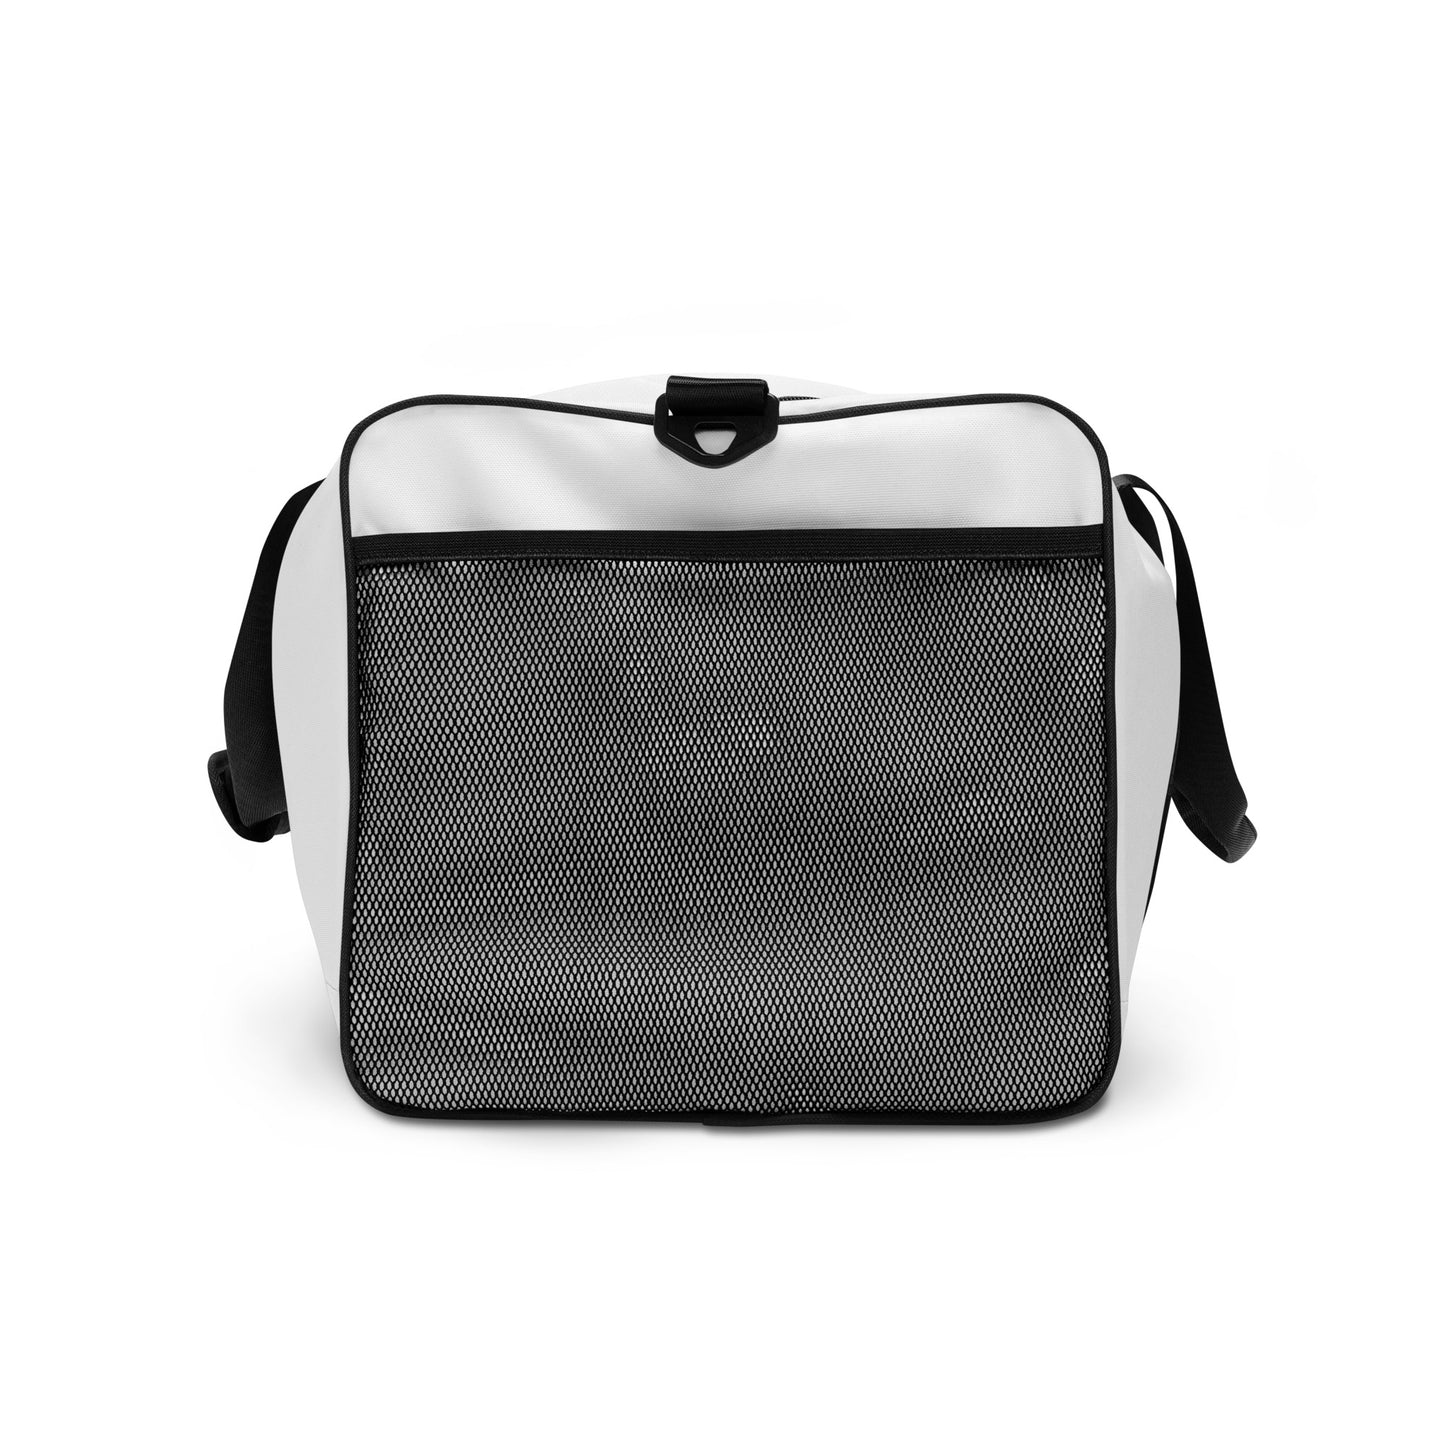 Mr. - Sustainably Made Duffle Bag